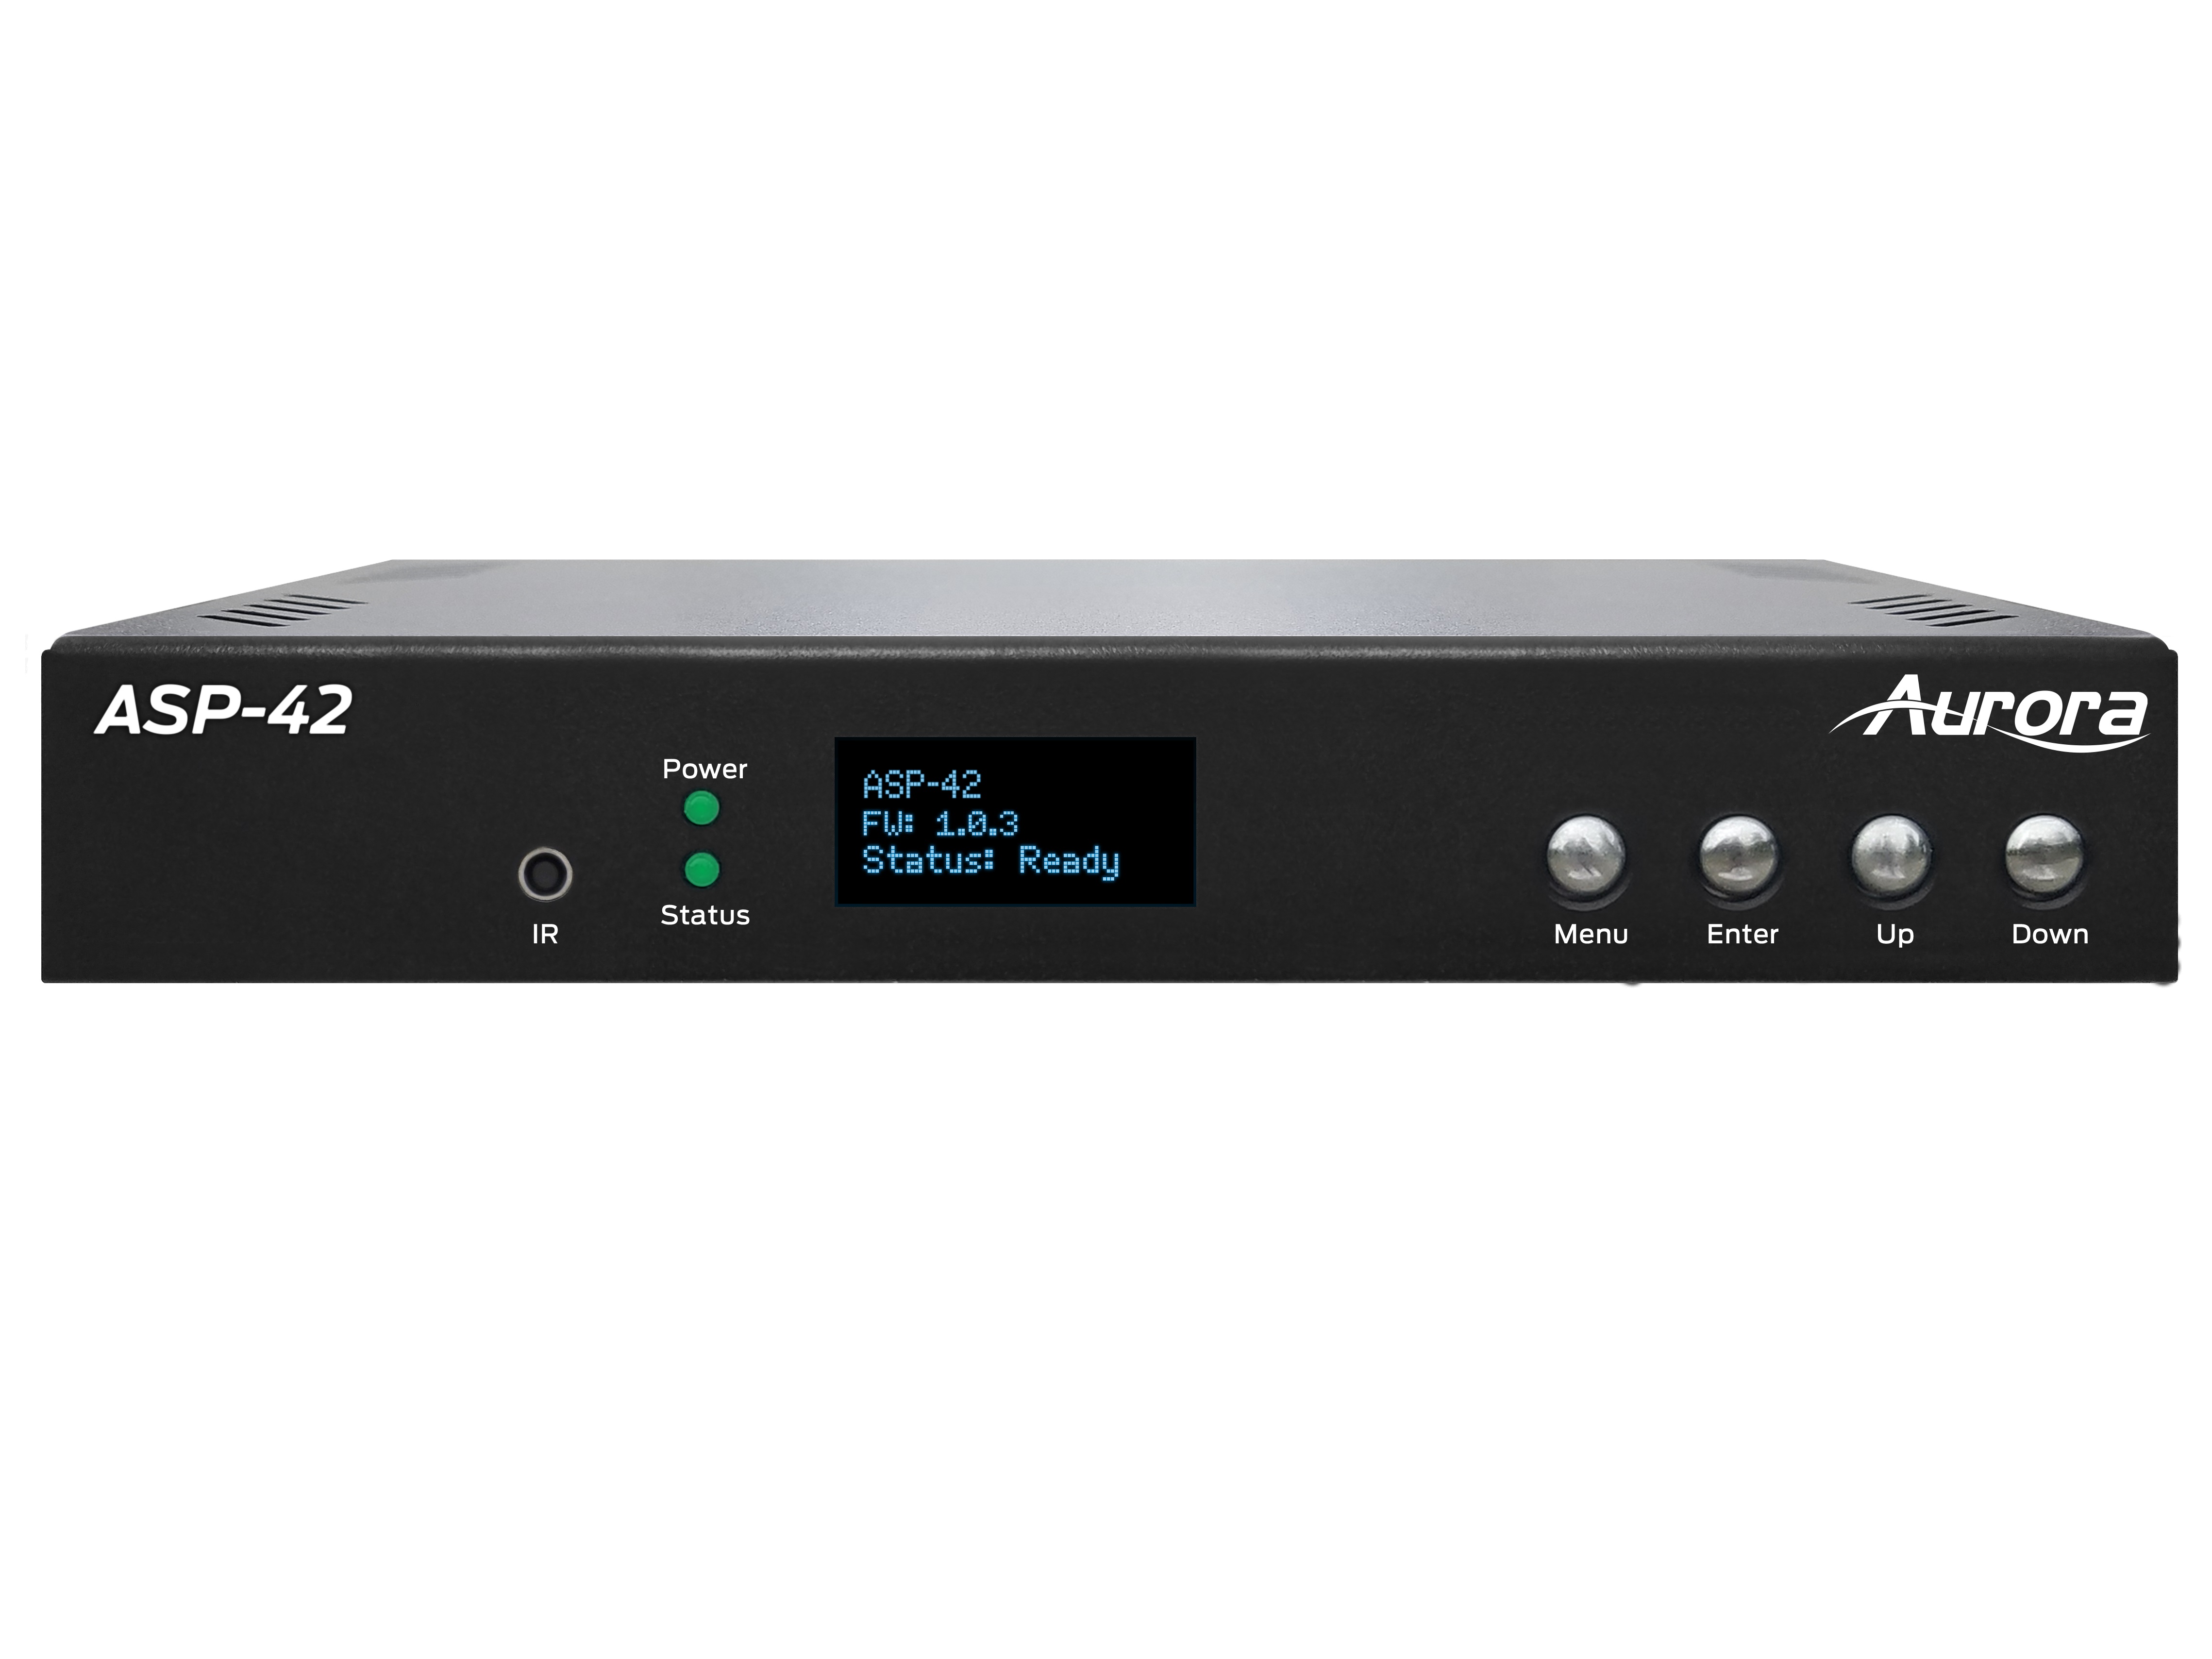 ASP-42 4K60 4x4x4 4x2 HDMI Matrix with USB 3.1 Capture/RS-232/IR and CEC Control and Dante Audio Option by Aurora Multimedia